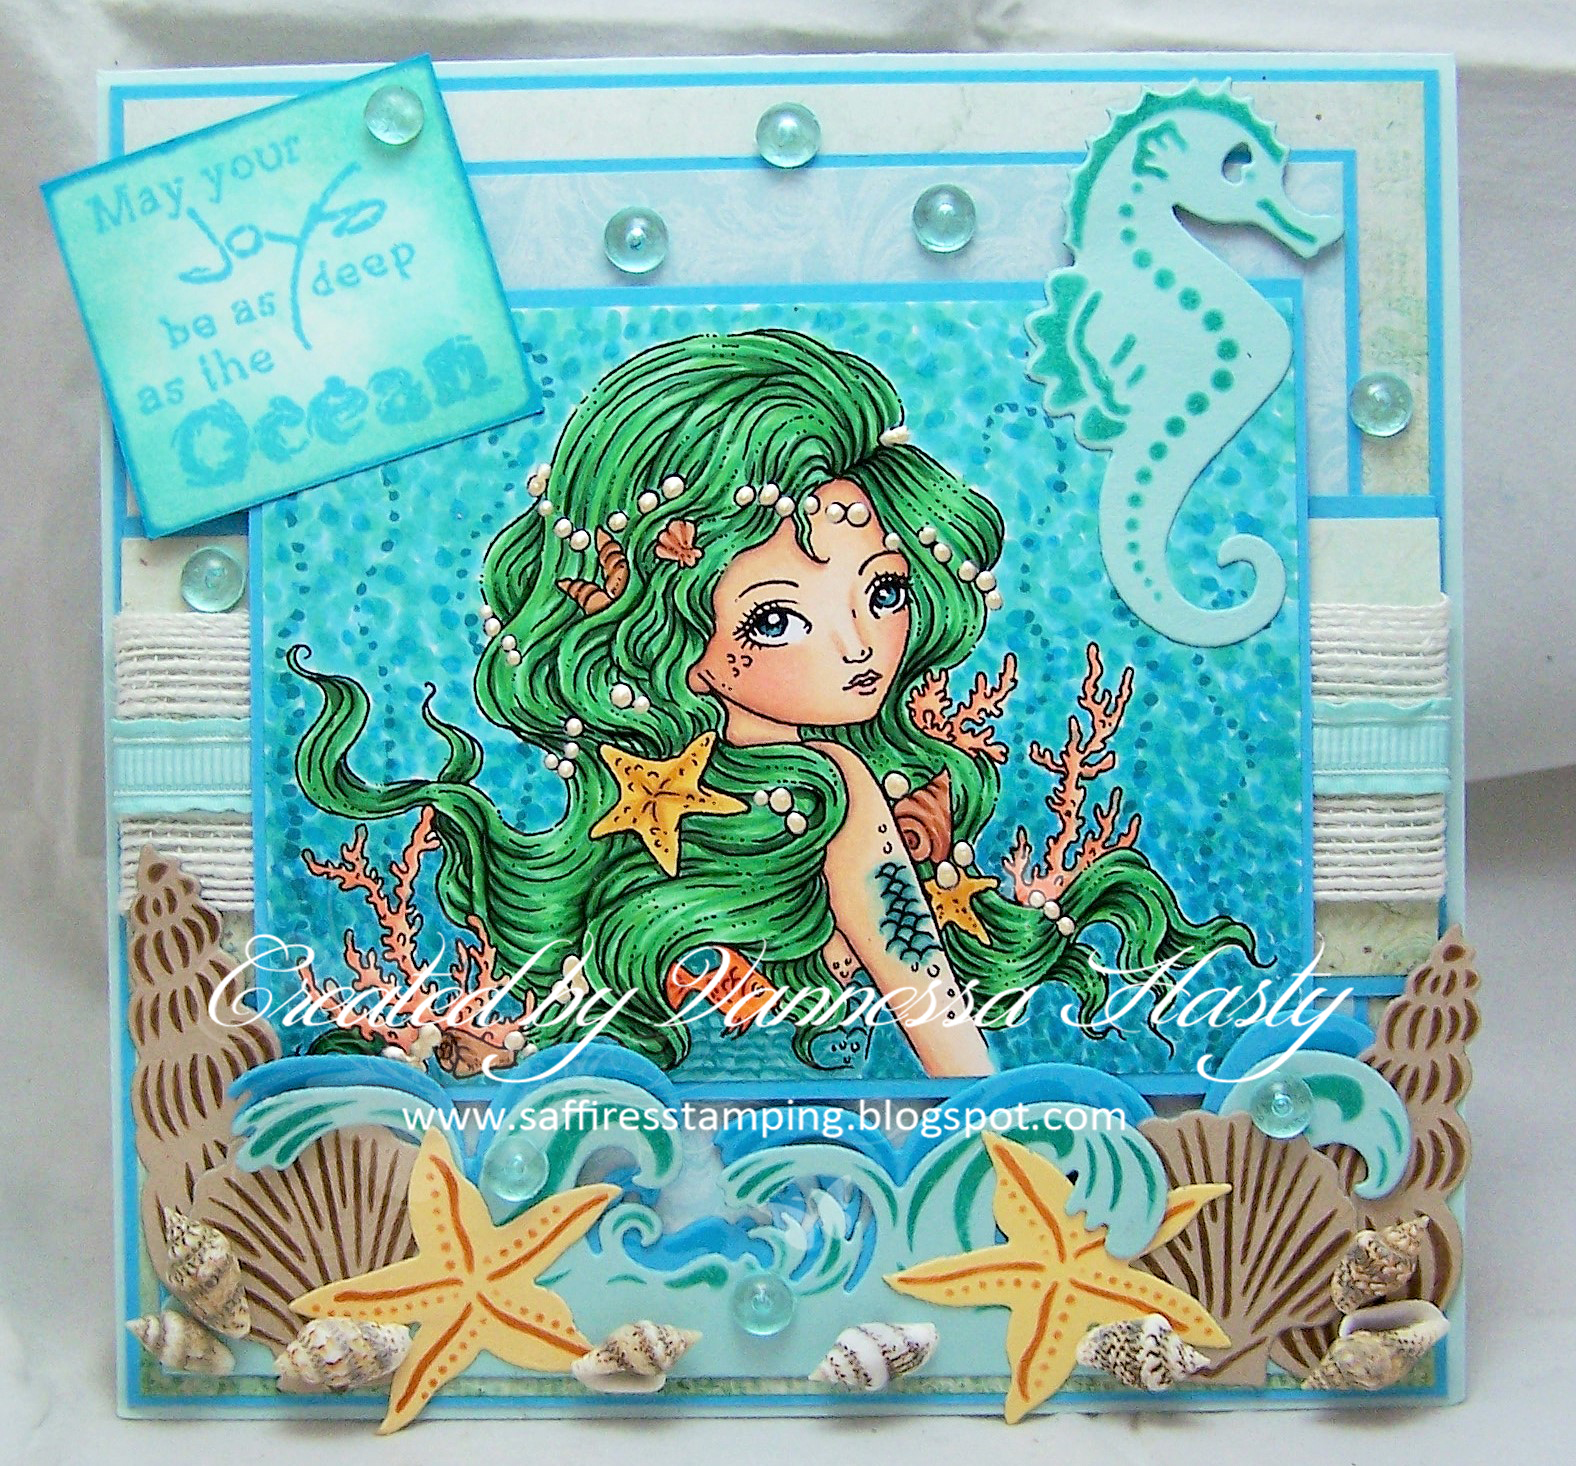 Saffire's Stamping: Ching-Chou Kuik Inspiration Post - Embrace The Ocean